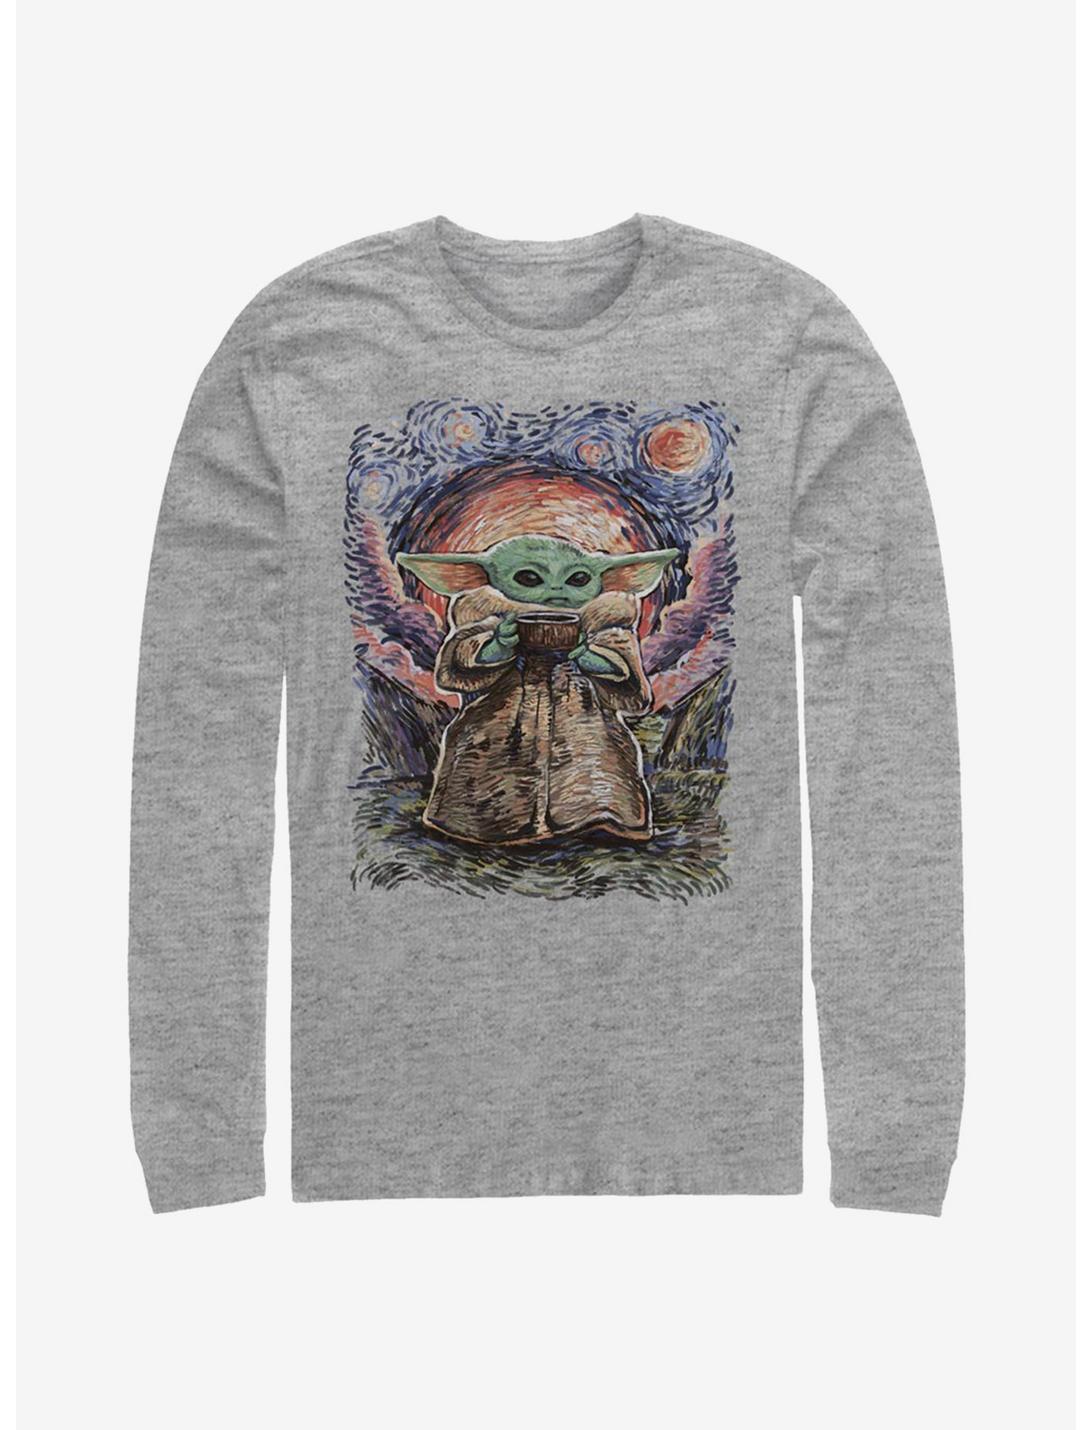 Star Wars The Mandalorian The Child Sipping Night Sky Long-Sleeve T-Shirt, ATH HTR, hi-res